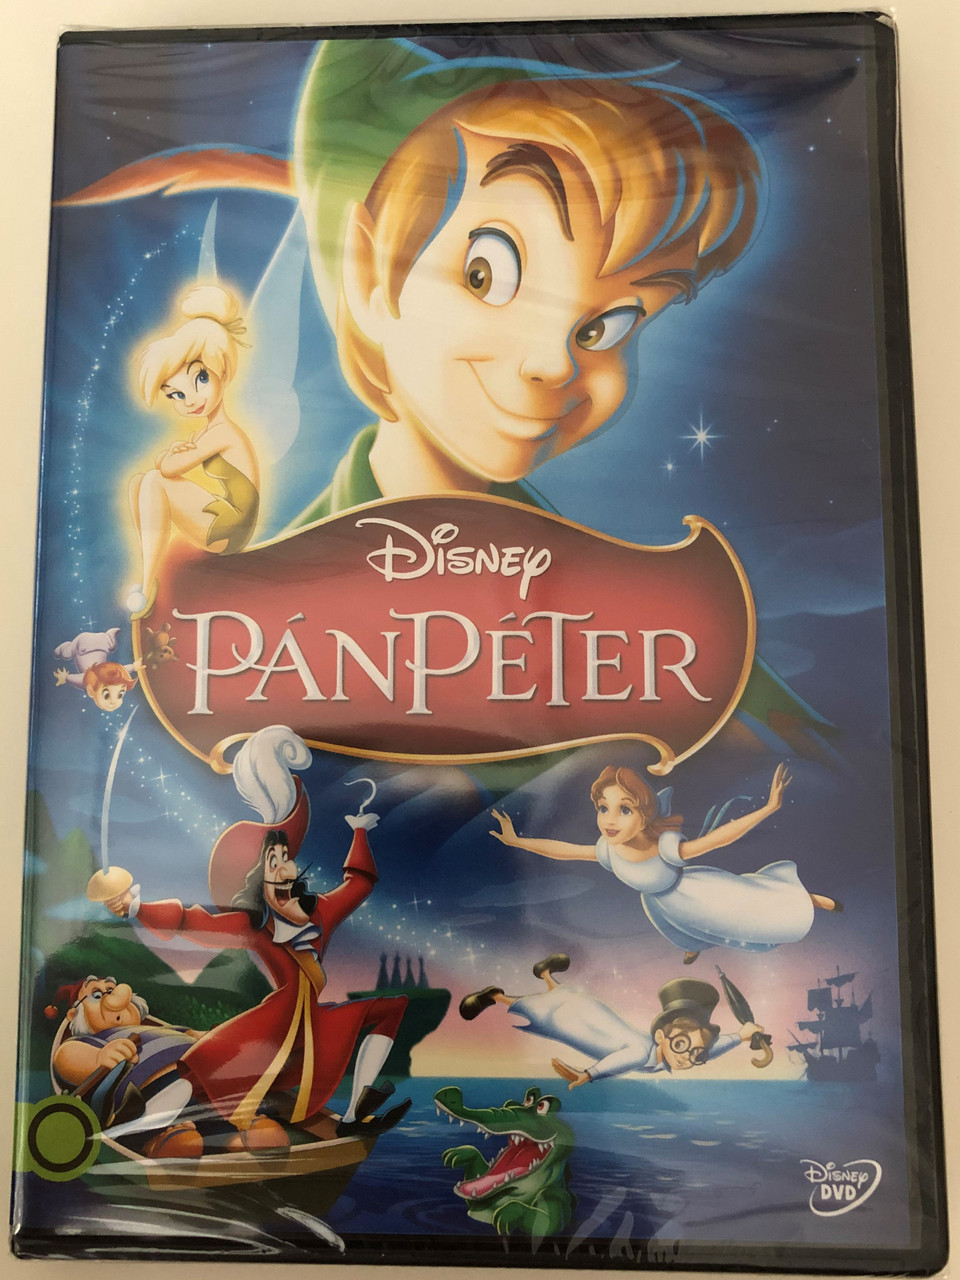 Peter Pan DVD 1953 Pán Péter / Directed by Clyde Geronimi, Wilfred Jackson,  Hamilton Luske / Produced by